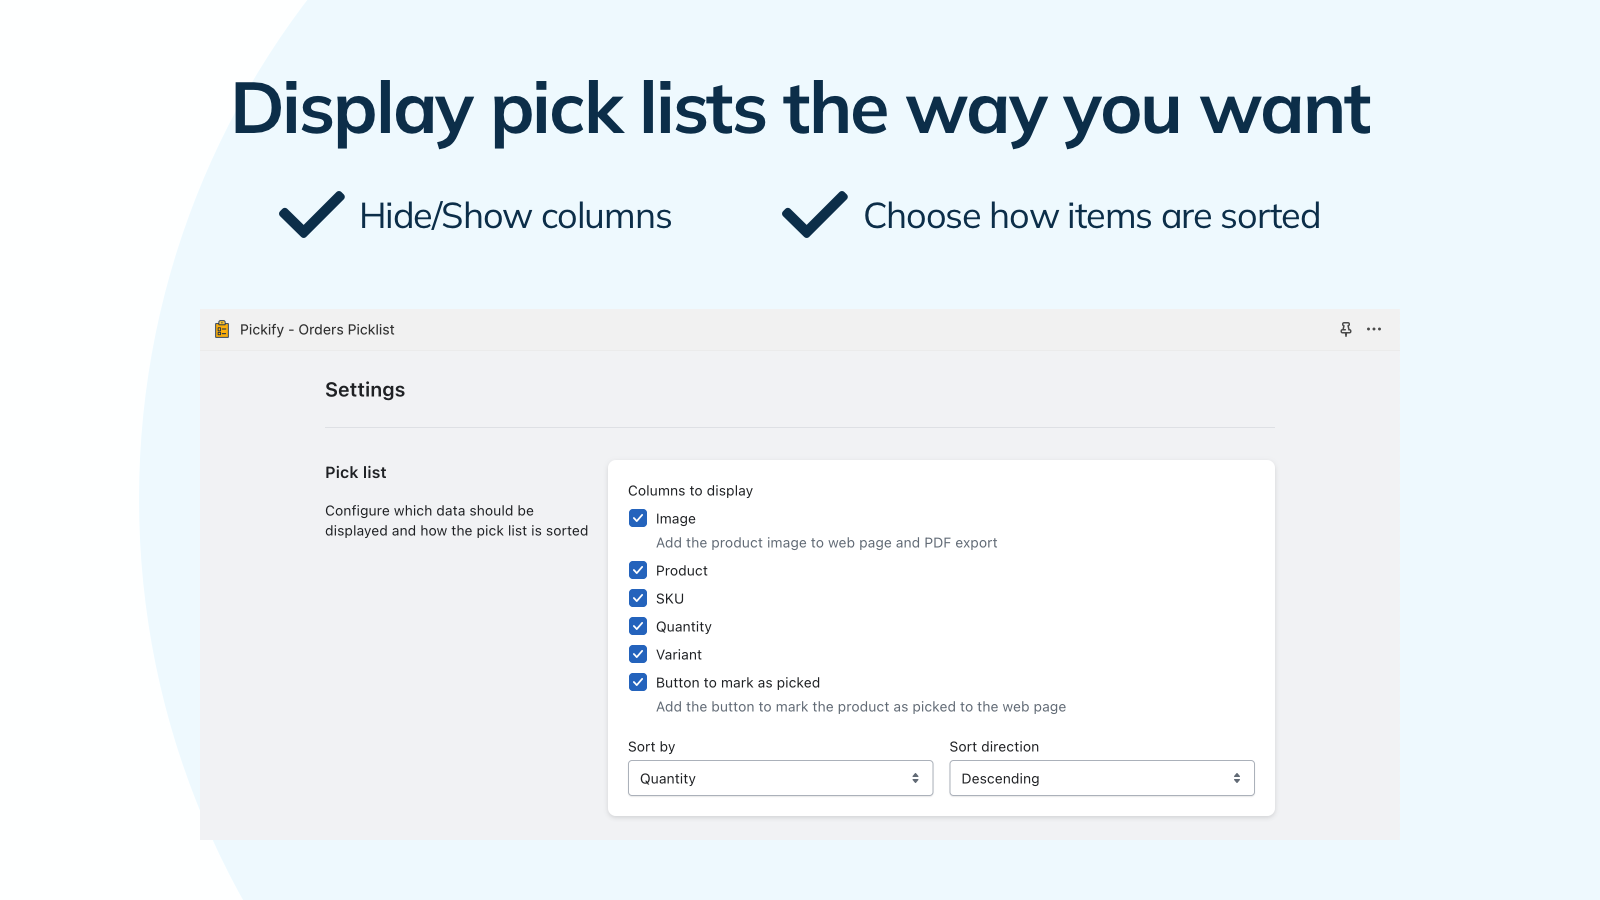 Display pick lists the way you want